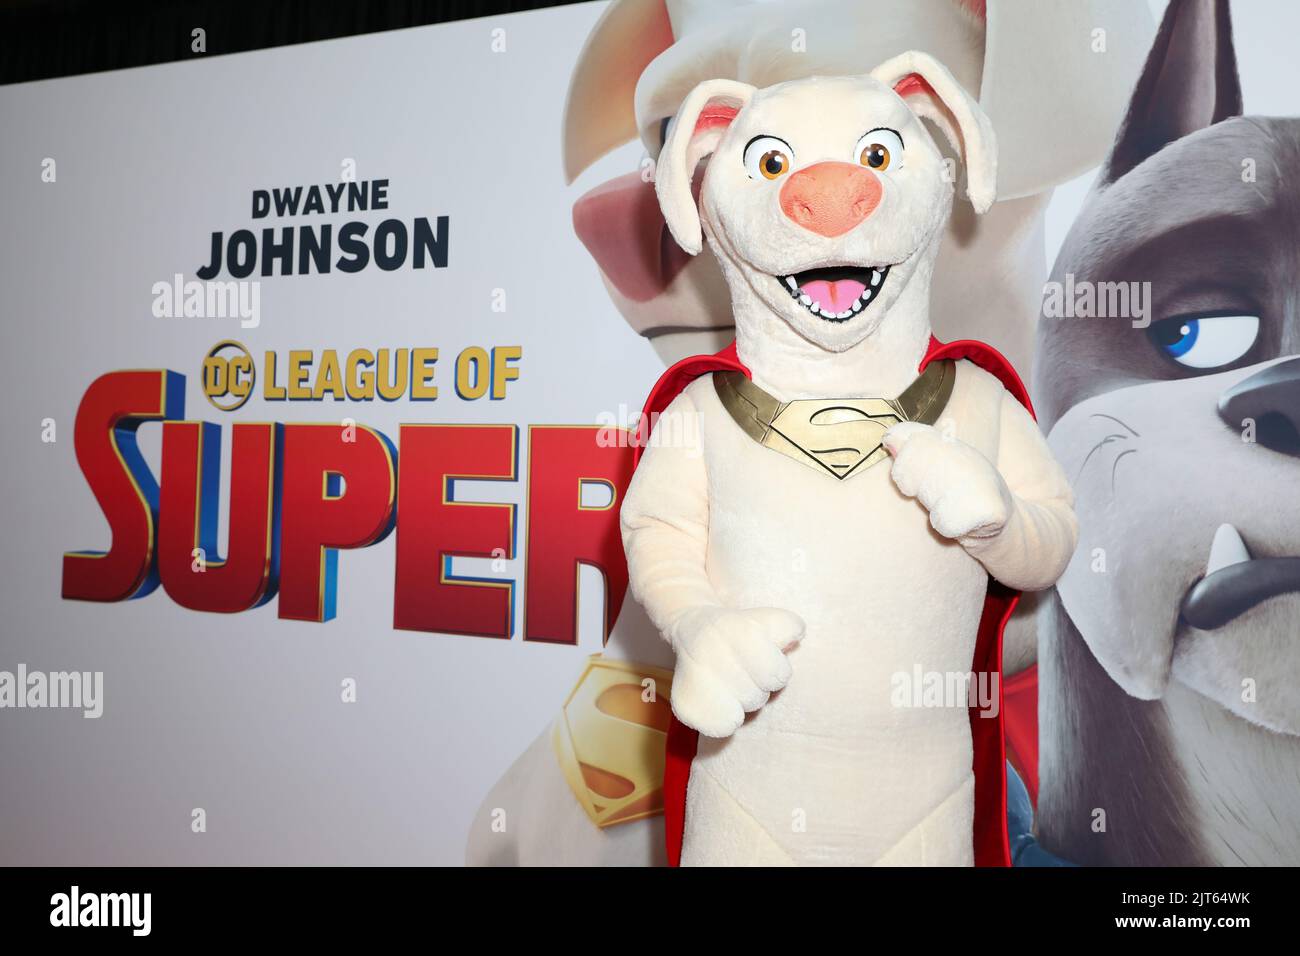 August 28, 2022: Film Character poses at the 'DC League of Super-Pets' Sydney Premiere at Events Cinemas Bondi Junction on August 28, 2022 in Sydney, NSW Australia  (Credit Image: © Christopher Khoury/Australian Press Agency via ZUMA  Wire) Stock Photo